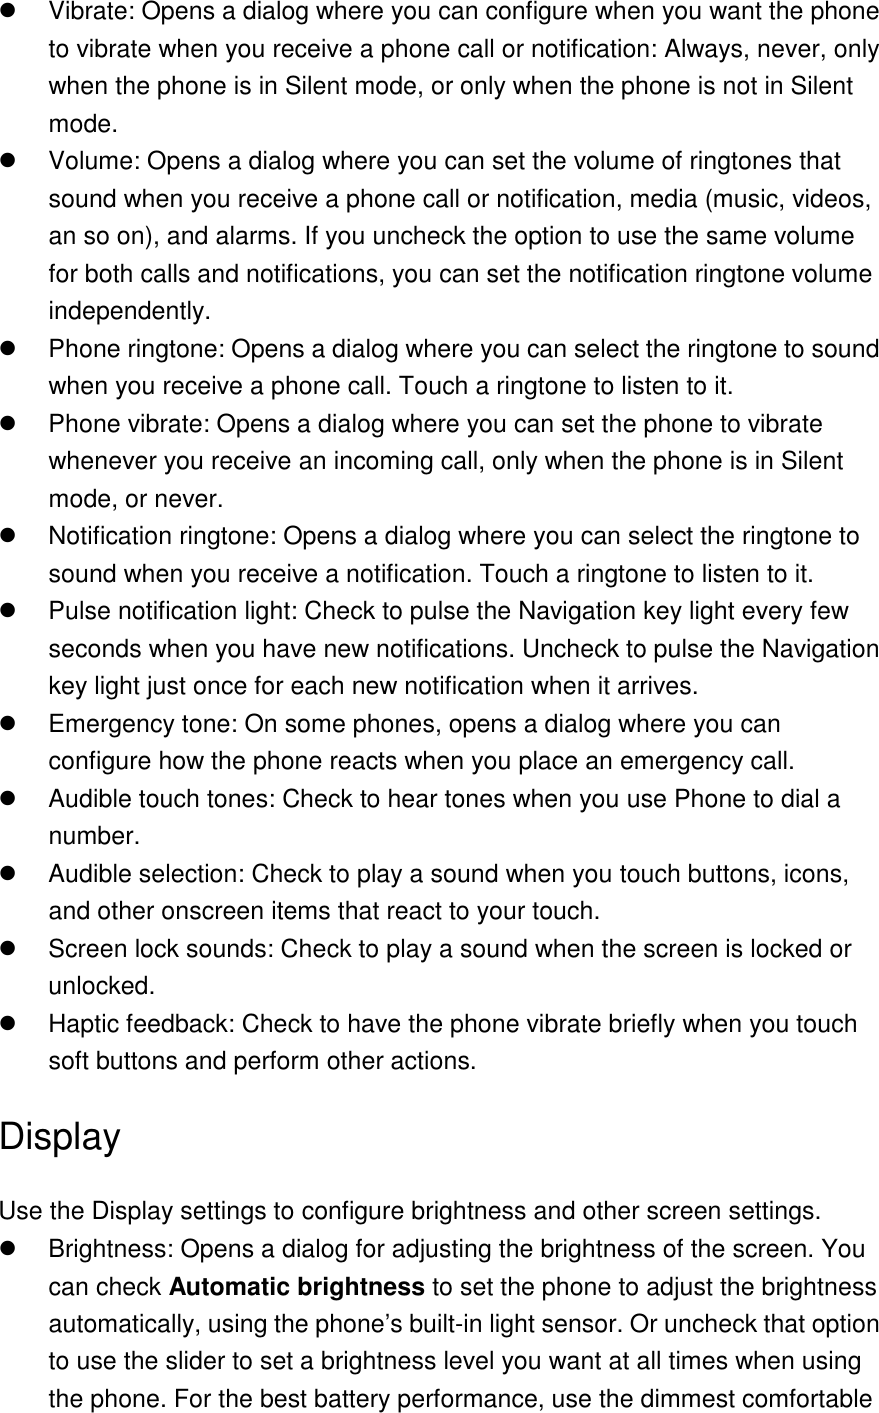   Vibrate: Opens a dialog where you can configure when you want the phone to vibrate when you receive a phone call or notification: Always, never, only when the phone is in Silent mode, or only when the phone is not in Silent mode.   Volume: Opens a dialog where you can set the volume of ringtones that sound when you receive a phone call or notification, media (music, videos, an so on), and alarms. If you uncheck the option to use the same volume for both calls and notifications, you can set the notification ringtone volume independently.   Phone ringtone: Opens a dialog where you can select the ringtone to sound when you receive a phone call. Touch a ringtone to listen to it.     Phone vibrate: Opens a dialog where you can set the phone to vibrate whenever you receive an incoming call, only when the phone is in Silent mode, or never.   Notification ringtone: Opens a dialog where you can select the ringtone to sound when you receive a notification. Touch a ringtone to listen to it.   Pulse notification light: Check to pulse the Navigation key light every few seconds when you have new notifications. Uncheck to pulse the Navigation key light just once for each new notification when it arrives.   Emergency tone: On some phones, opens a dialog where you can configure how the phone reacts when you place an emergency call.   Audible touch tones: Check to hear tones when you use Phone to dial a number.   Audible selection: Check to play a sound when you touch buttons, icons, and other onscreen items that react to your touch.   Screen lock sounds: Check to play a sound when the screen is locked or unlocked.   Haptic feedback: Check to have the phone vibrate briefly when you touch soft buttons and perform other actions. Display Use the Display settings to configure brightness and other screen settings.   Brightness: Opens a dialog for adjusting the brightness of the screen. You can check Automatic brightness to set the phone to adjust the brightness automatically, using the phone’s built-in light sensor. Or uncheck that option to use the slider to set a brightness level you want at all times when using the phone. For the best battery performance, use the dimmest comfortable 